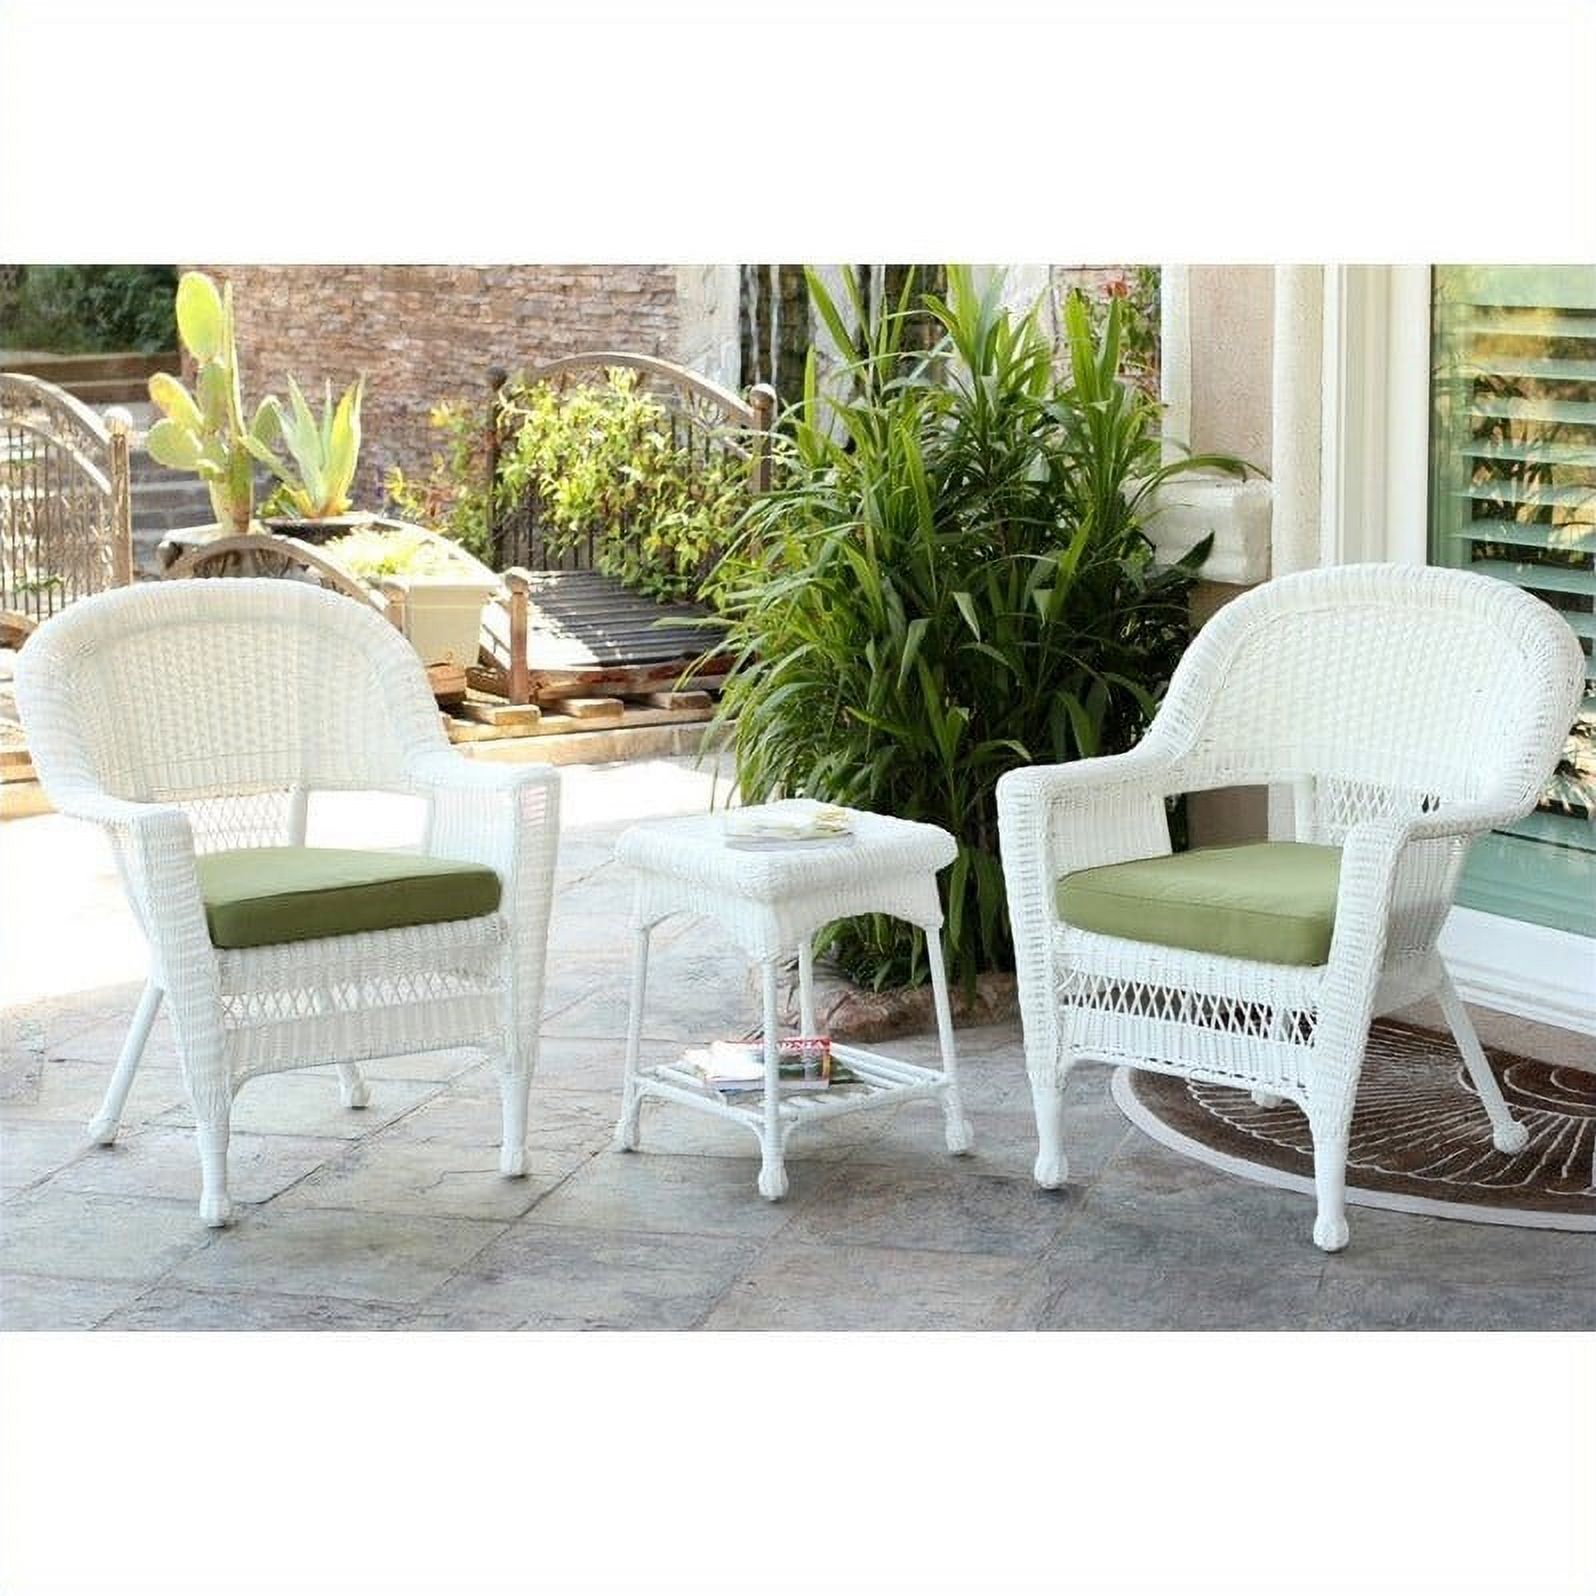 Jeco 3 Piece Wicker Conversation Set in White with Green Cushions - image 2 of 2